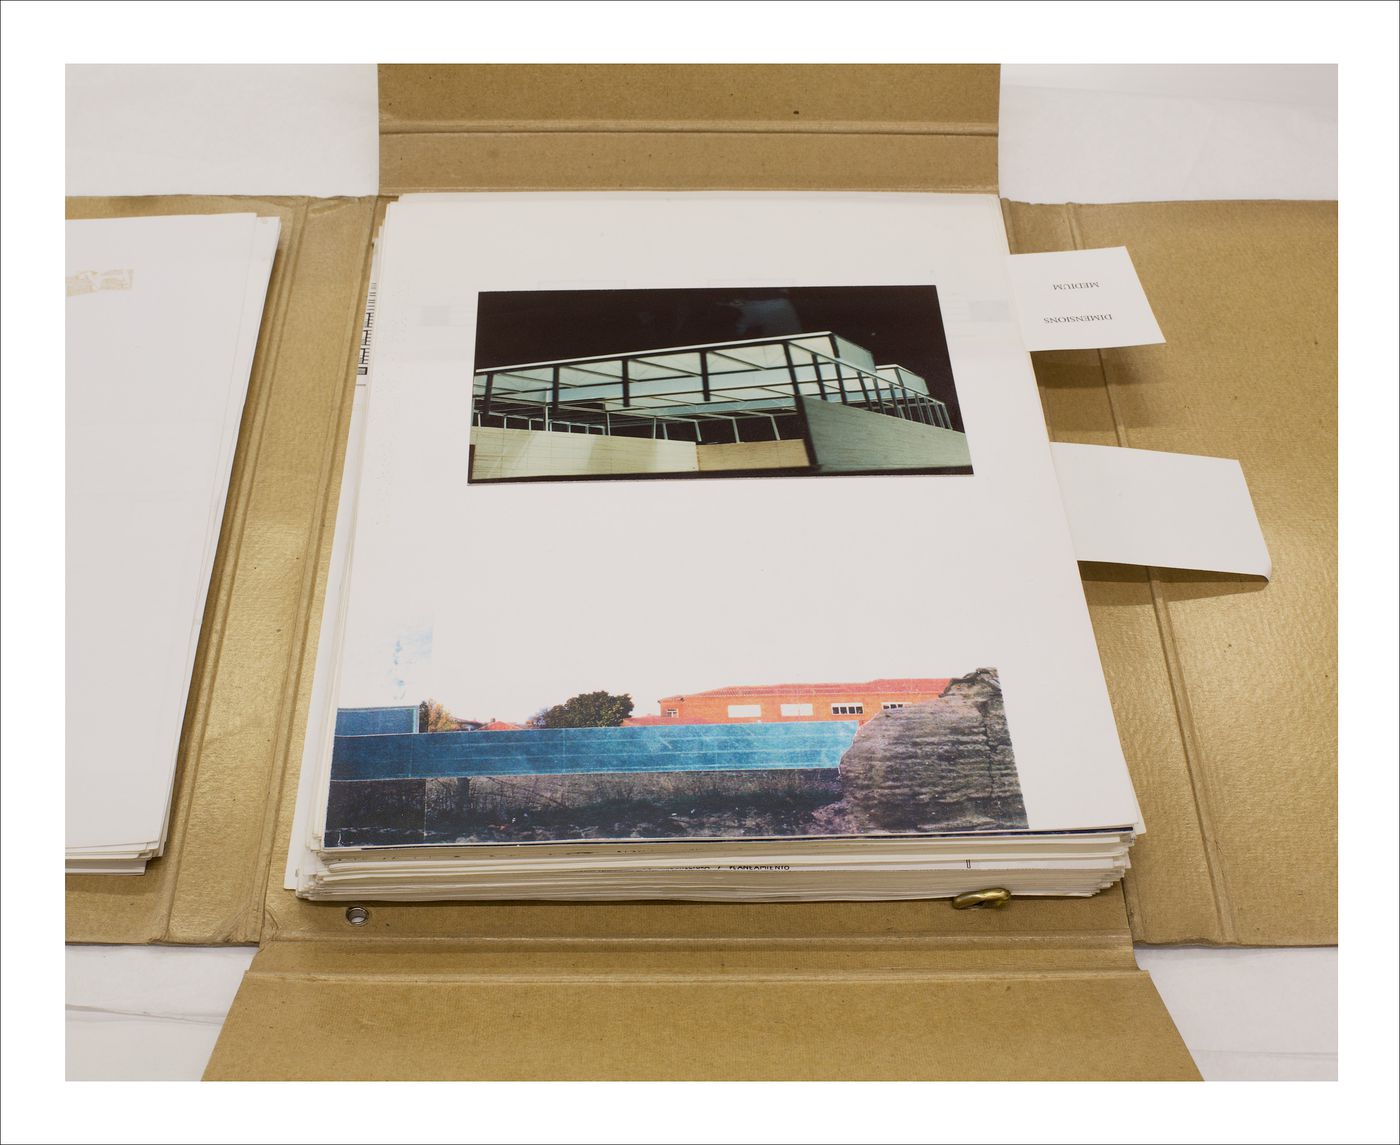 Proofs of Relevance: View of a photographic layout for a portfolio showing a model and a collage of the Madrigal de las Altas Sports Hall, Abalos & Herreros (1990-1991), Avila, Spain